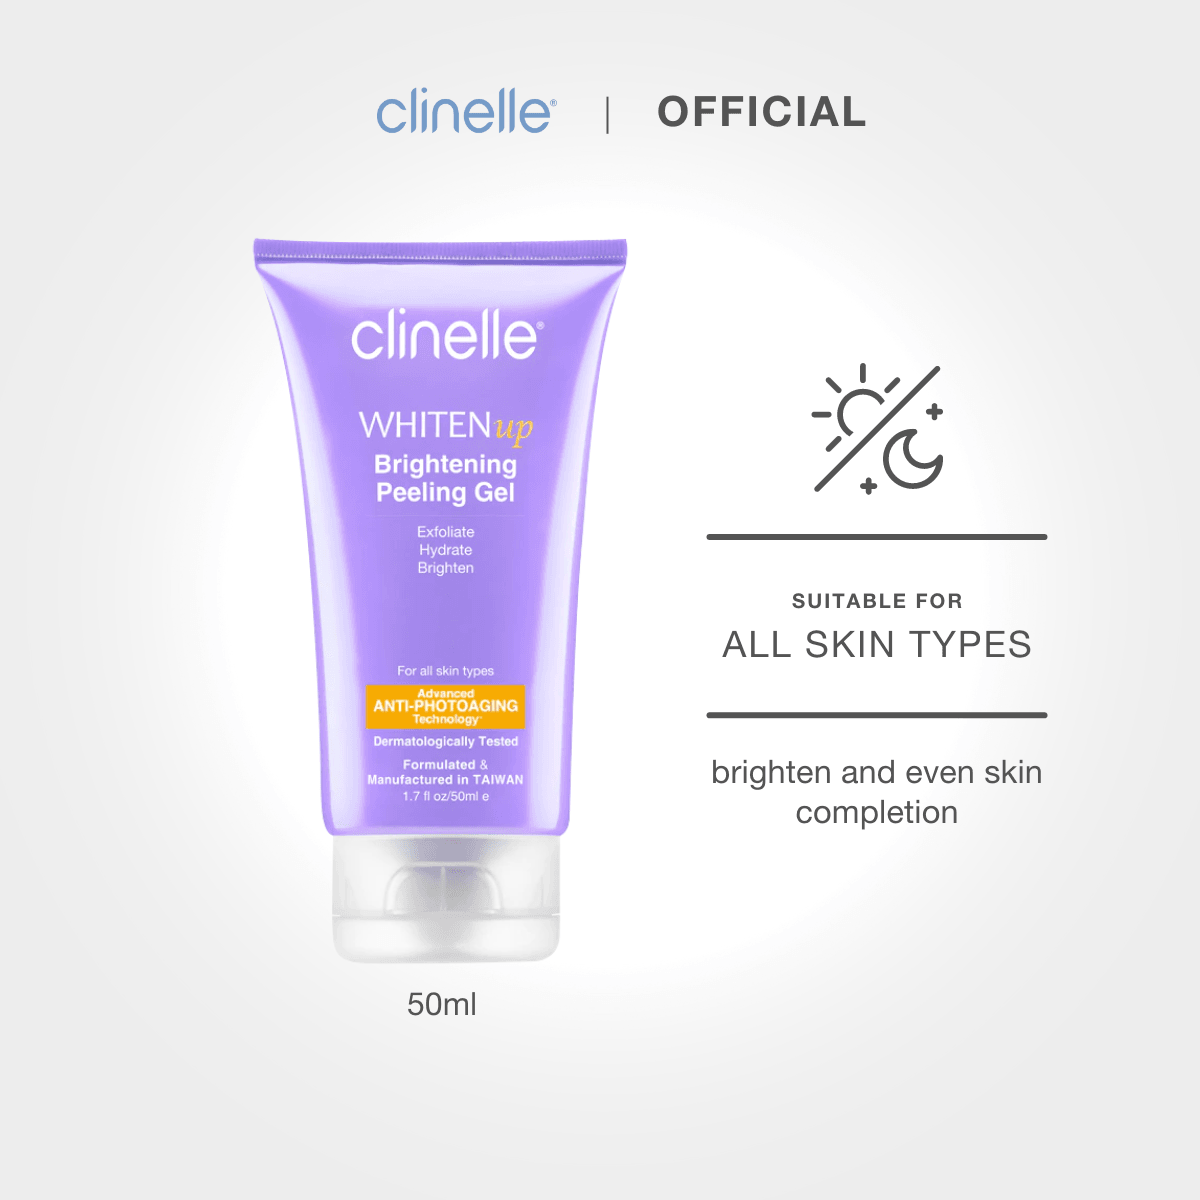 whitenup brightening duo foc facial mask set - Clinelle